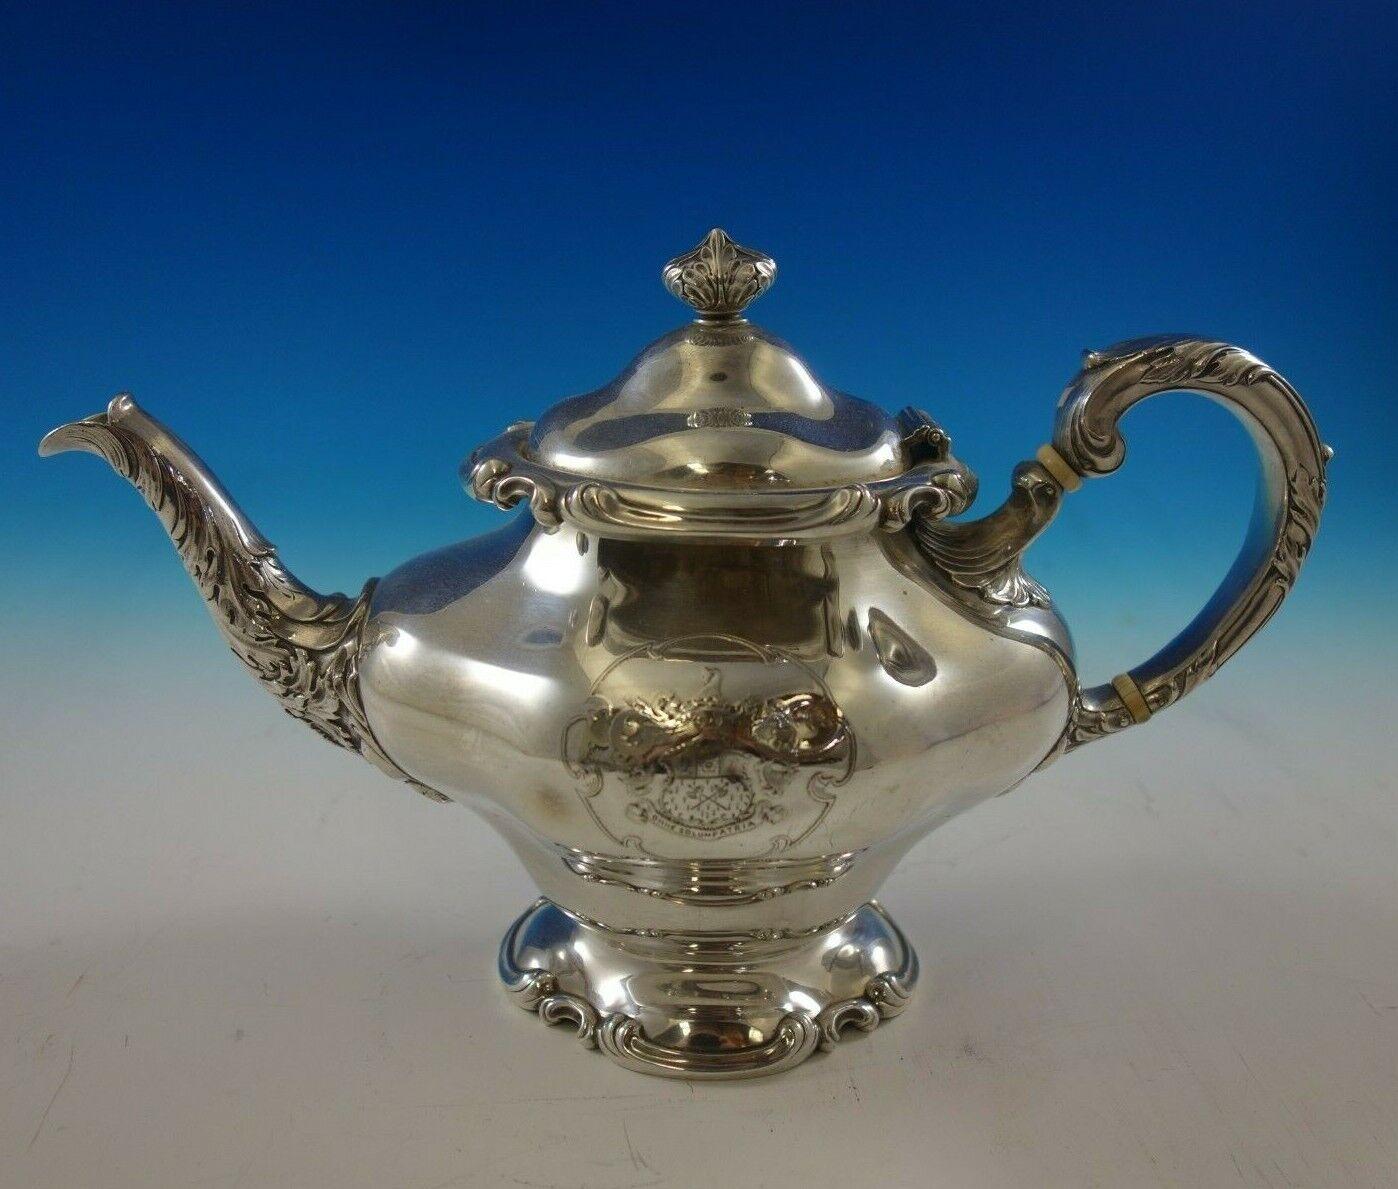 20th Century Princess by Towle Sterling Silver Tea Set 7pc with Leaves Scrolls #7629 '#4930' For Sale